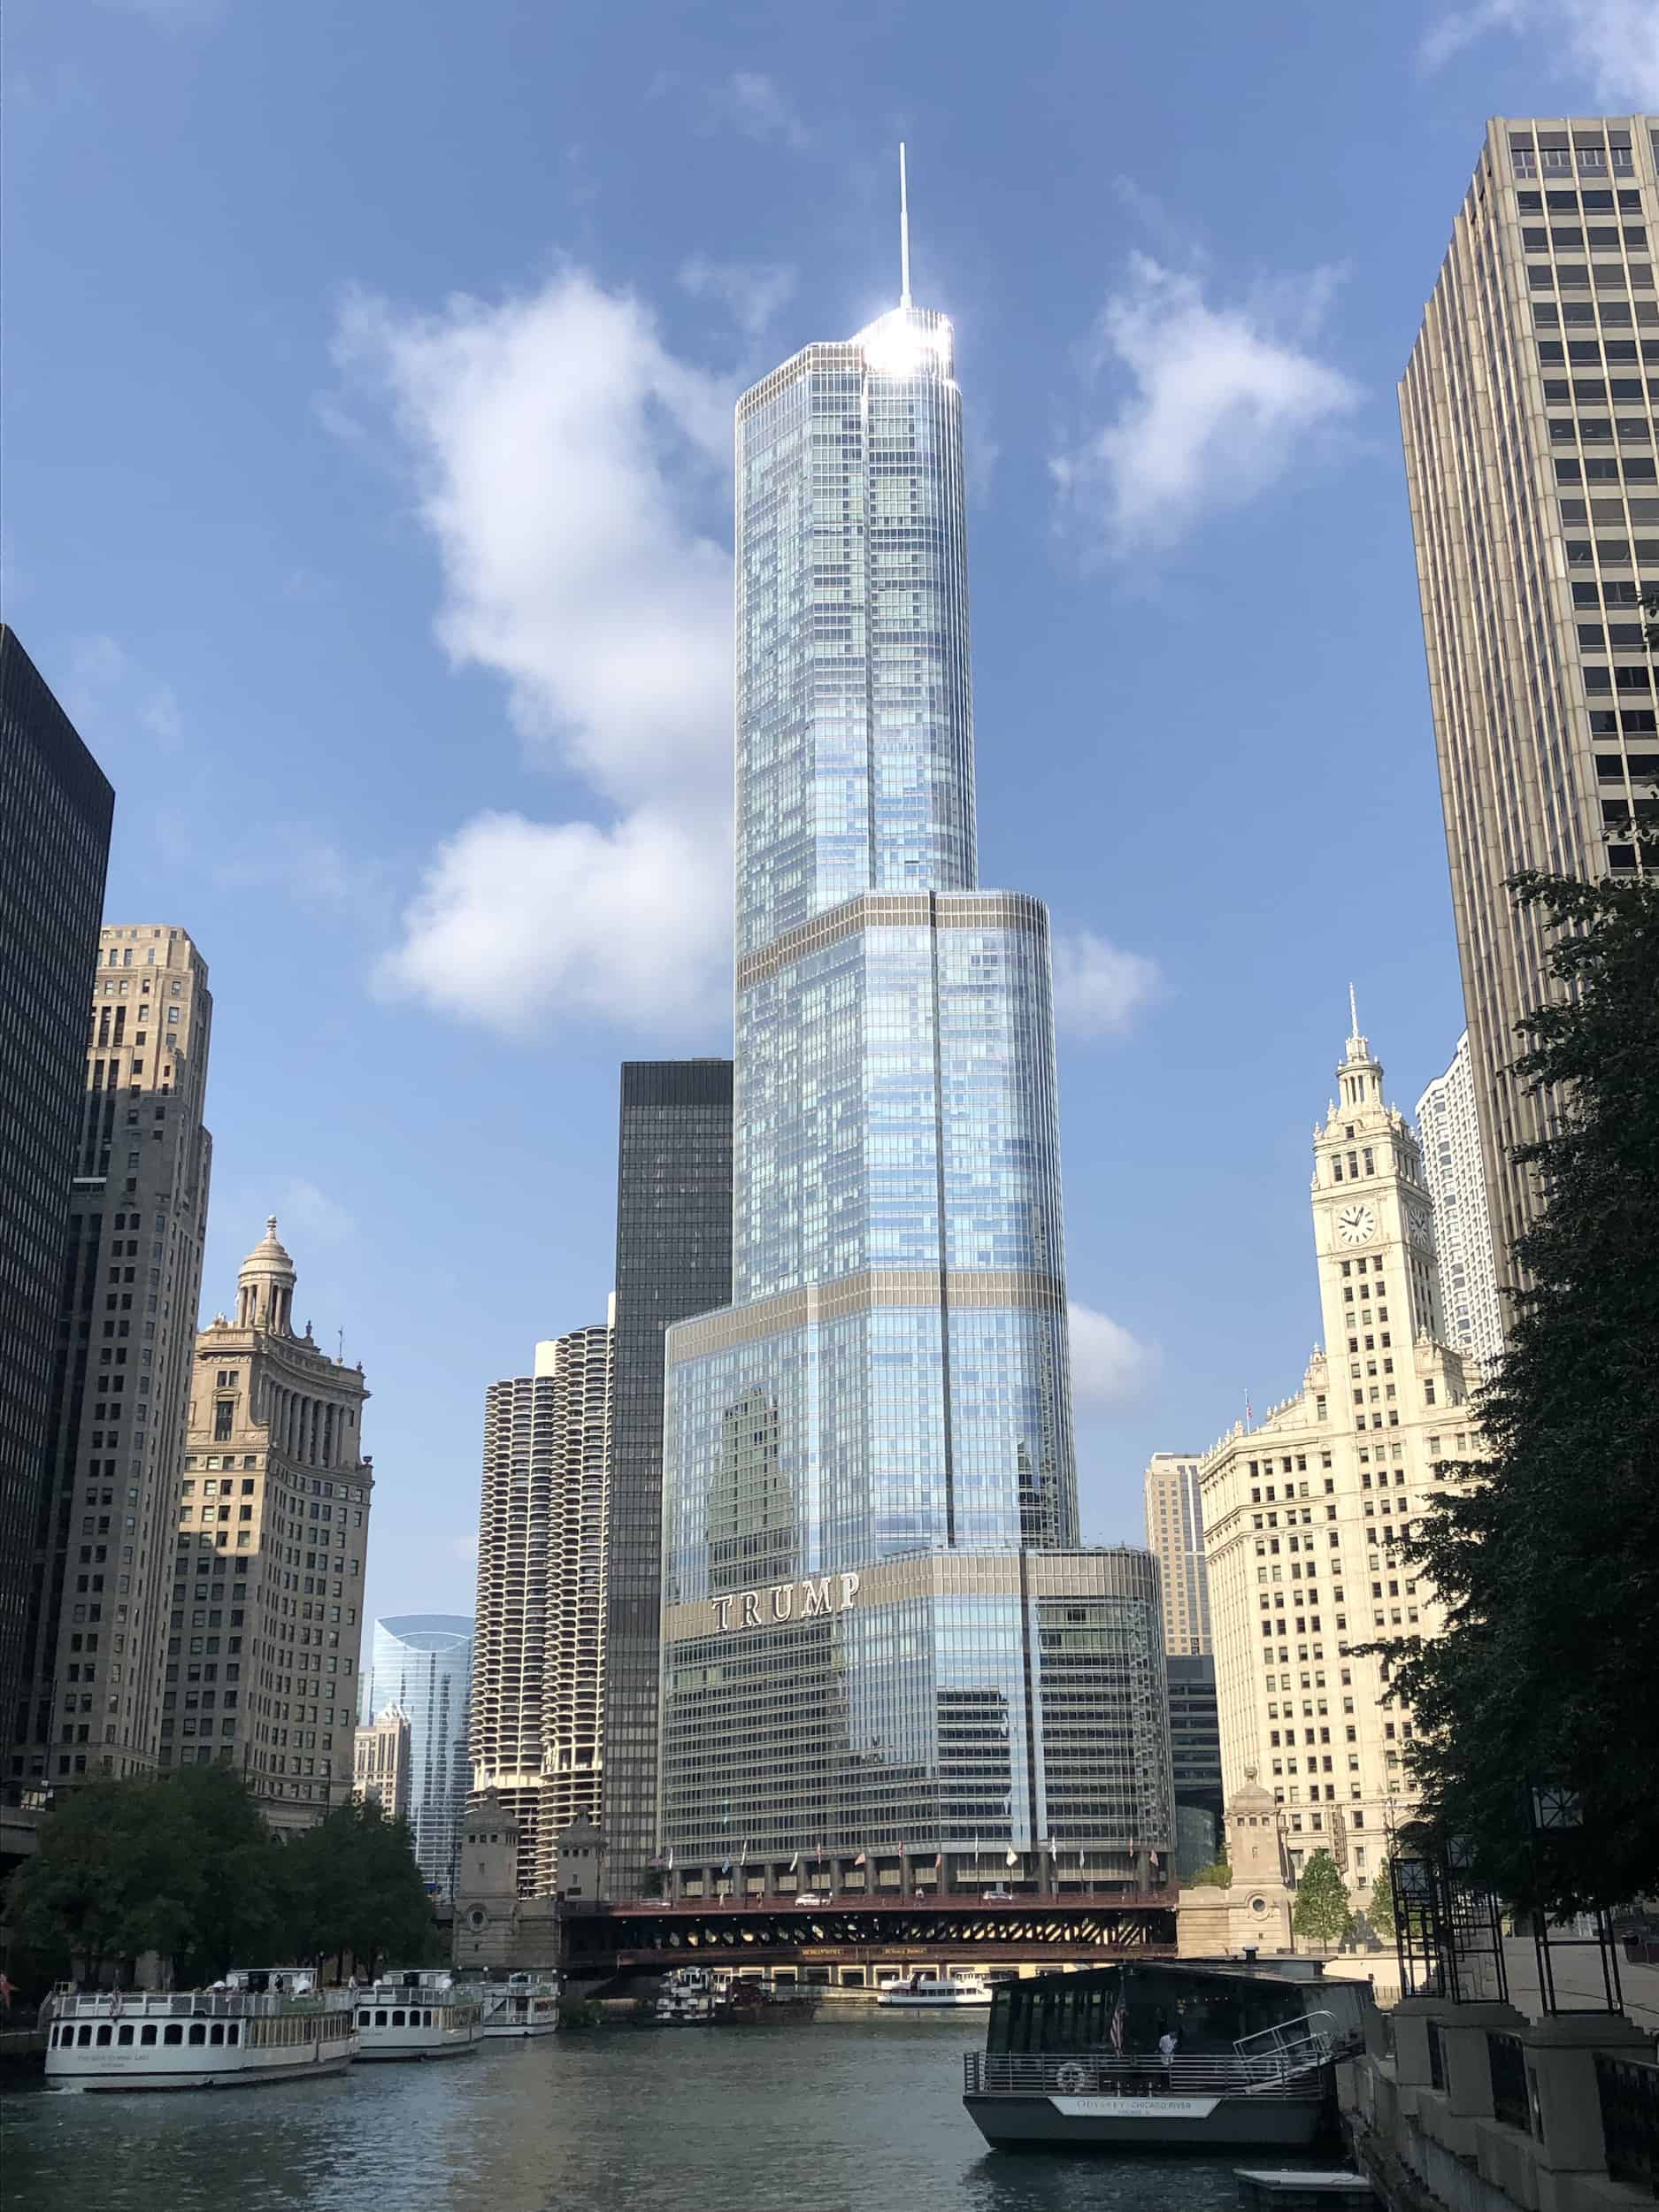 Trump International Hotel and Tower in Chicago, Illinois